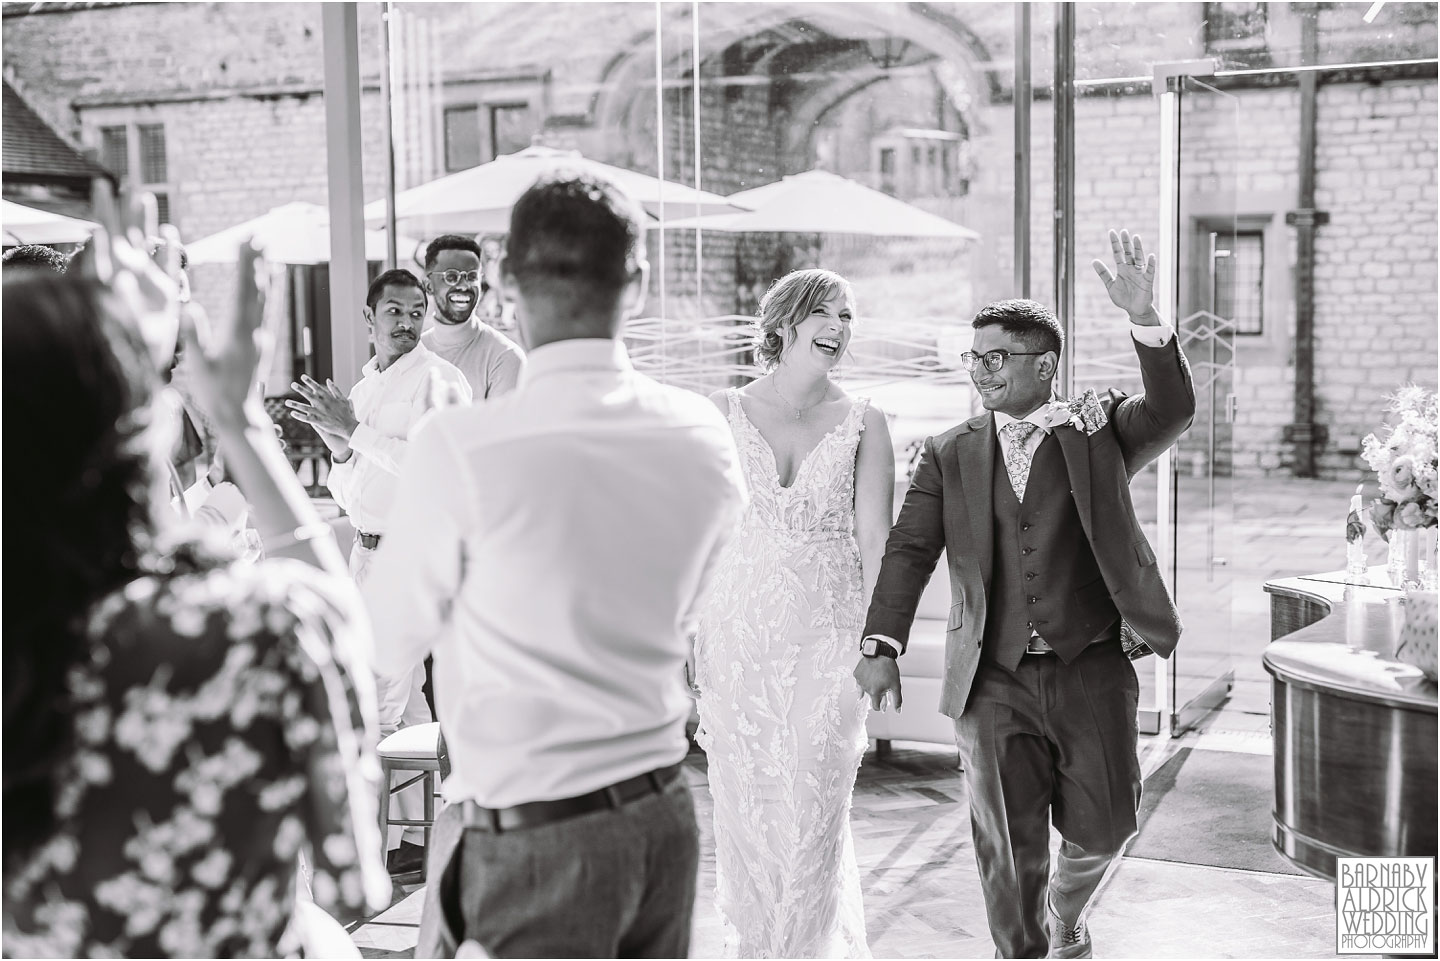 Candid photos of the entrance of the bride and groom at Thornbridge Hall by Yorkshire Wedding Photographer Barnaby Aldrick